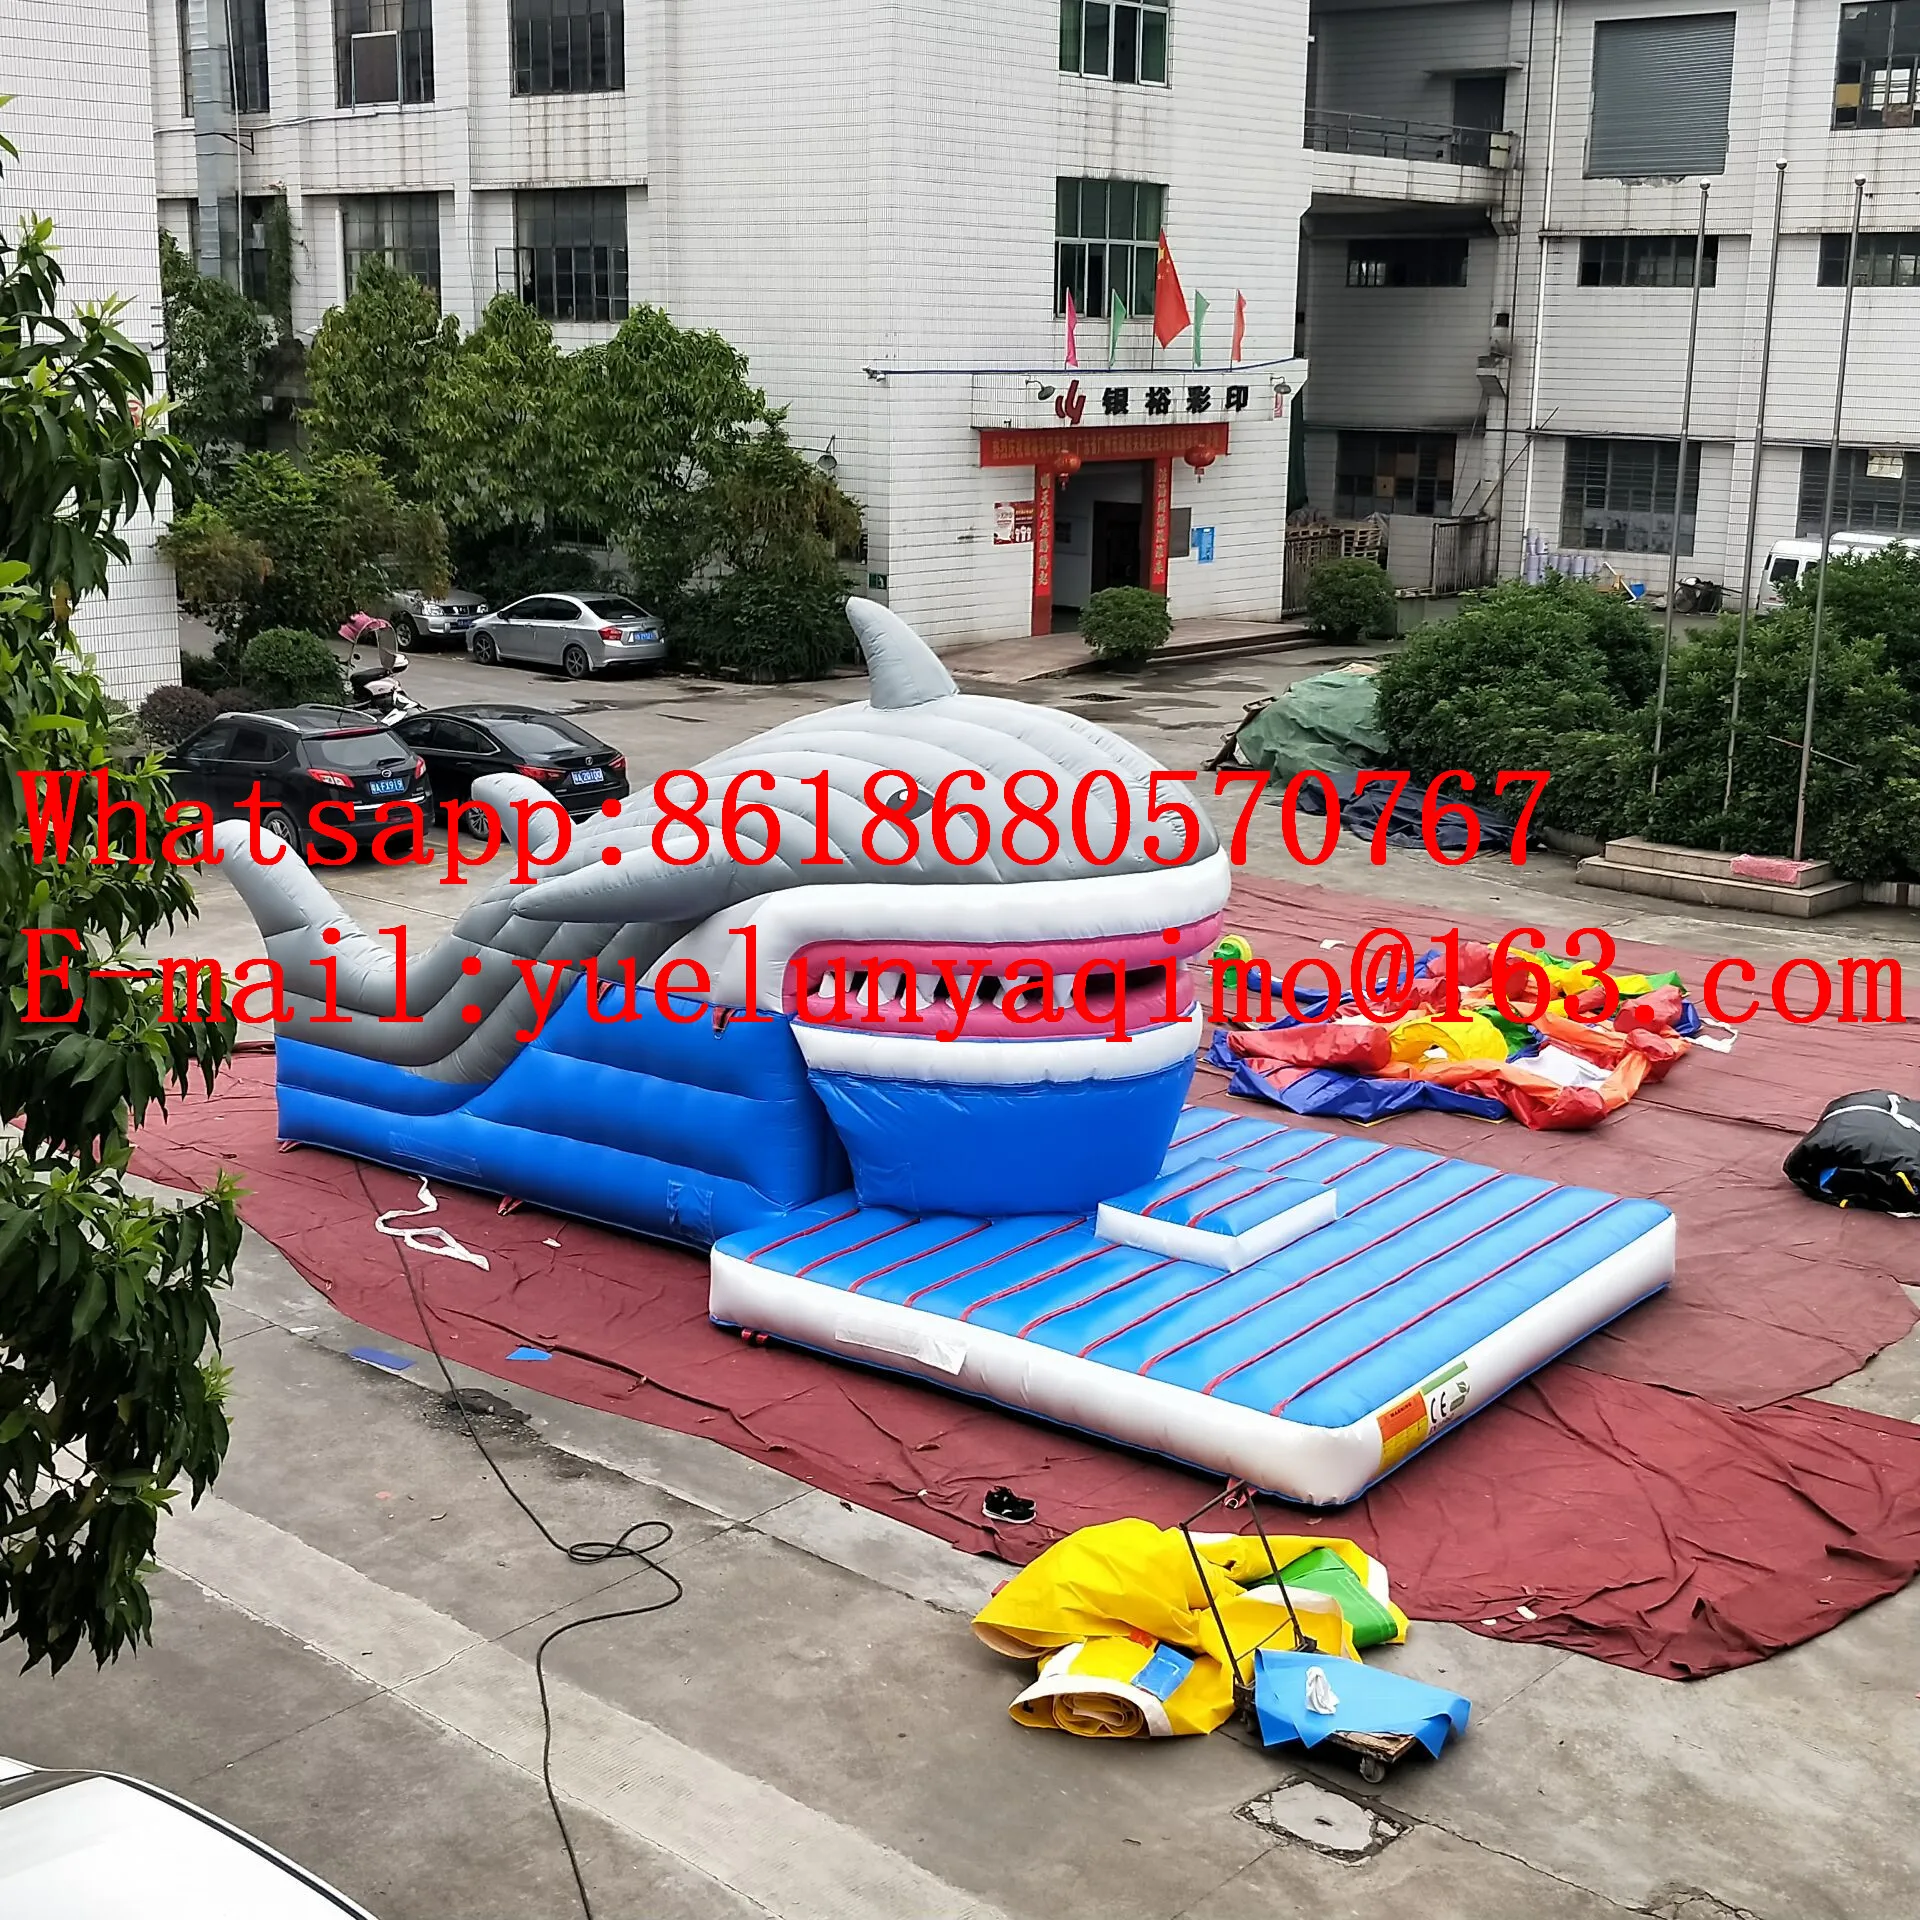 

Factory direct selling large outdoor shark inflatable slide jumping bed castle combination YLY-028